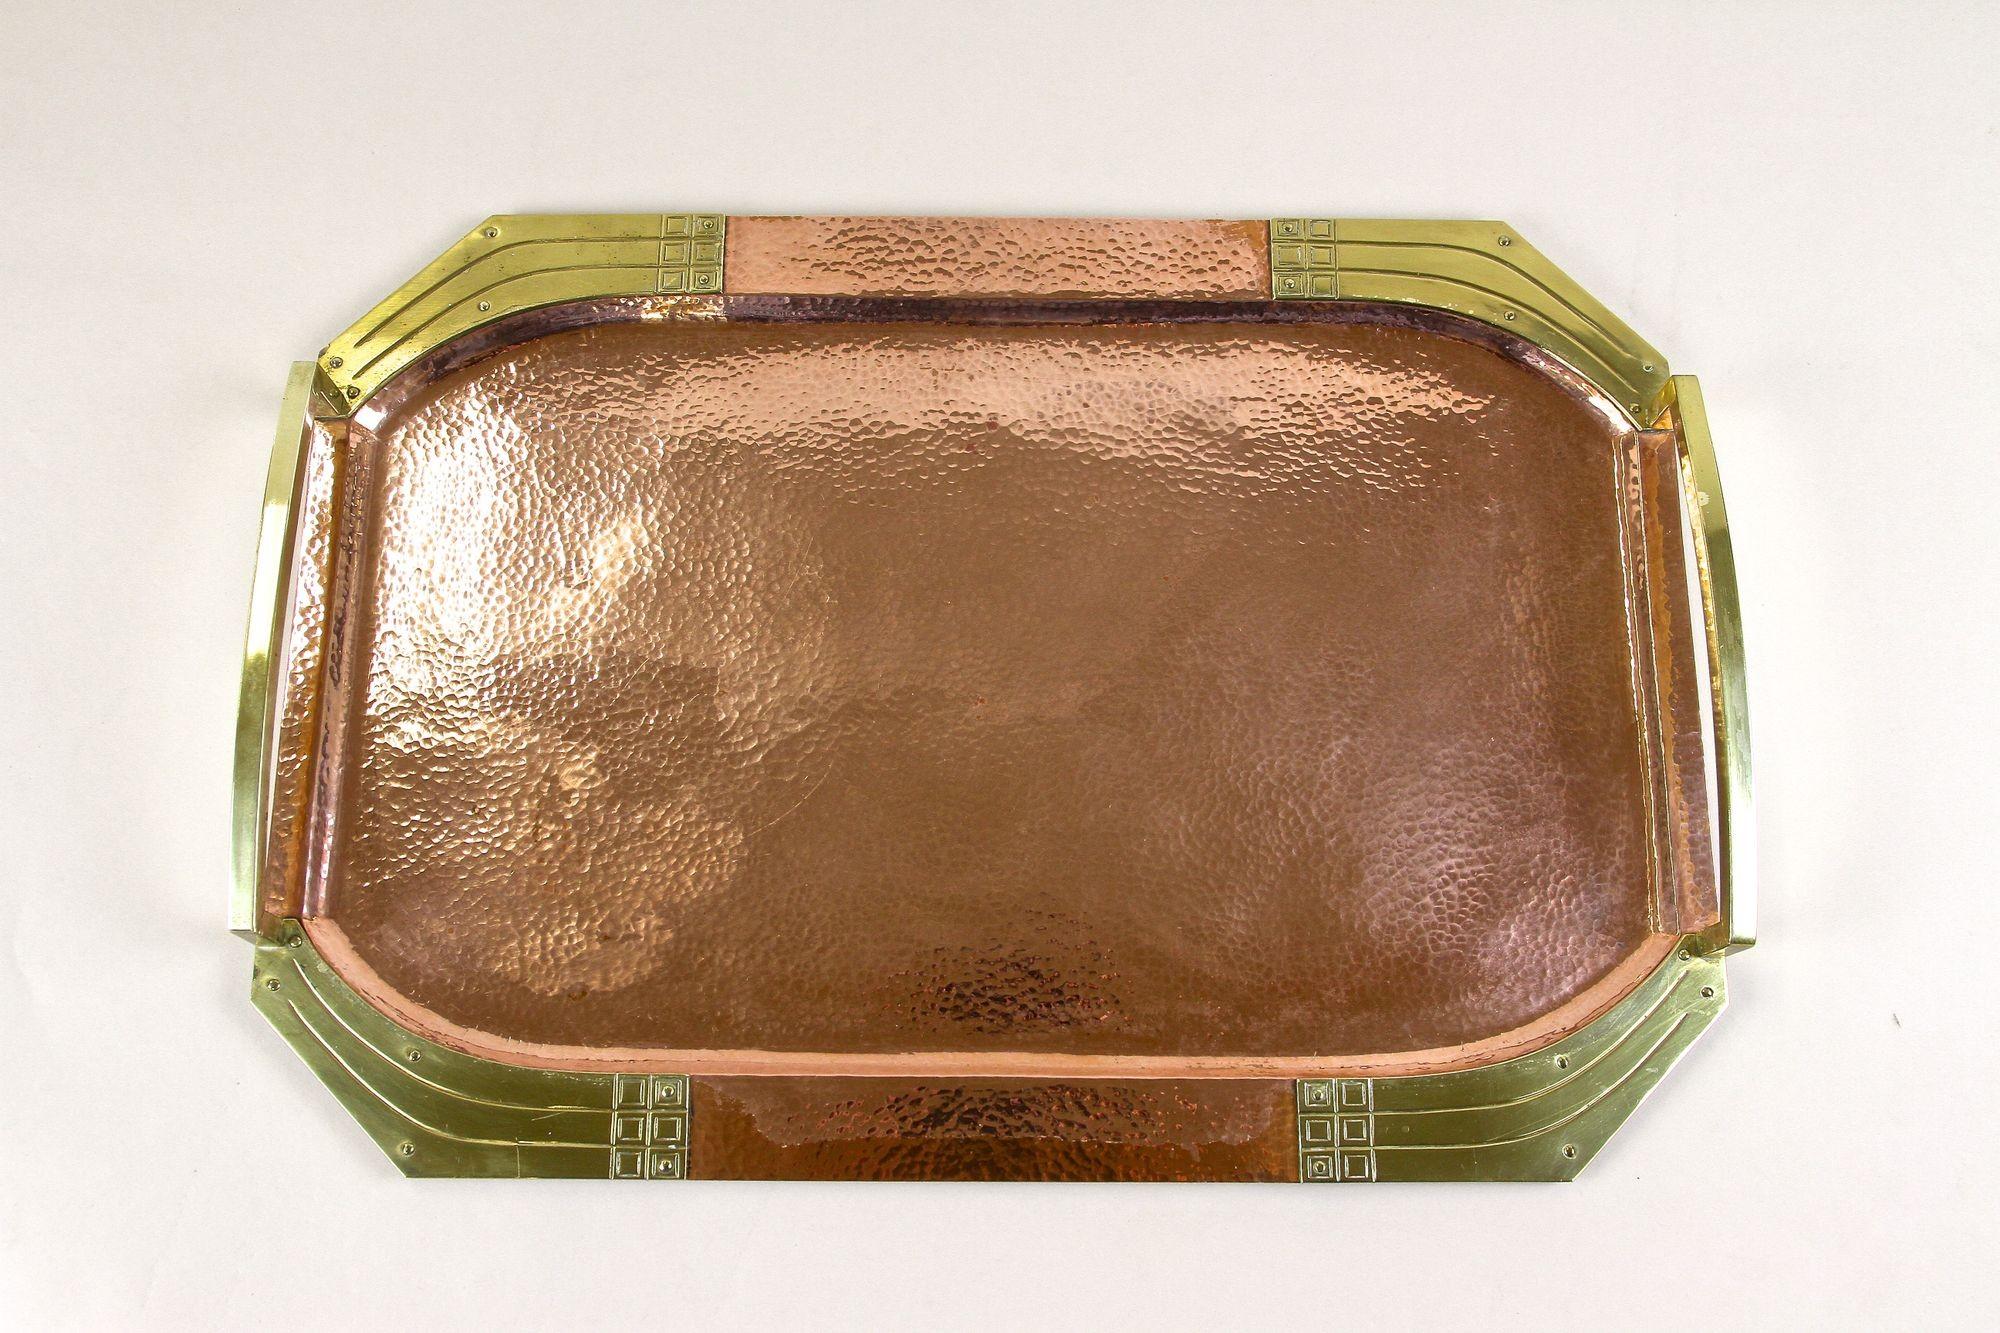 Impressive Art Nouveau copper tray with gilt brass handles from the very early period in Austria. Elaborately handcrafted around 1900, this one of a kind Vienna secession tray is an absolute extraordinary item. A heavy serving tray which has been